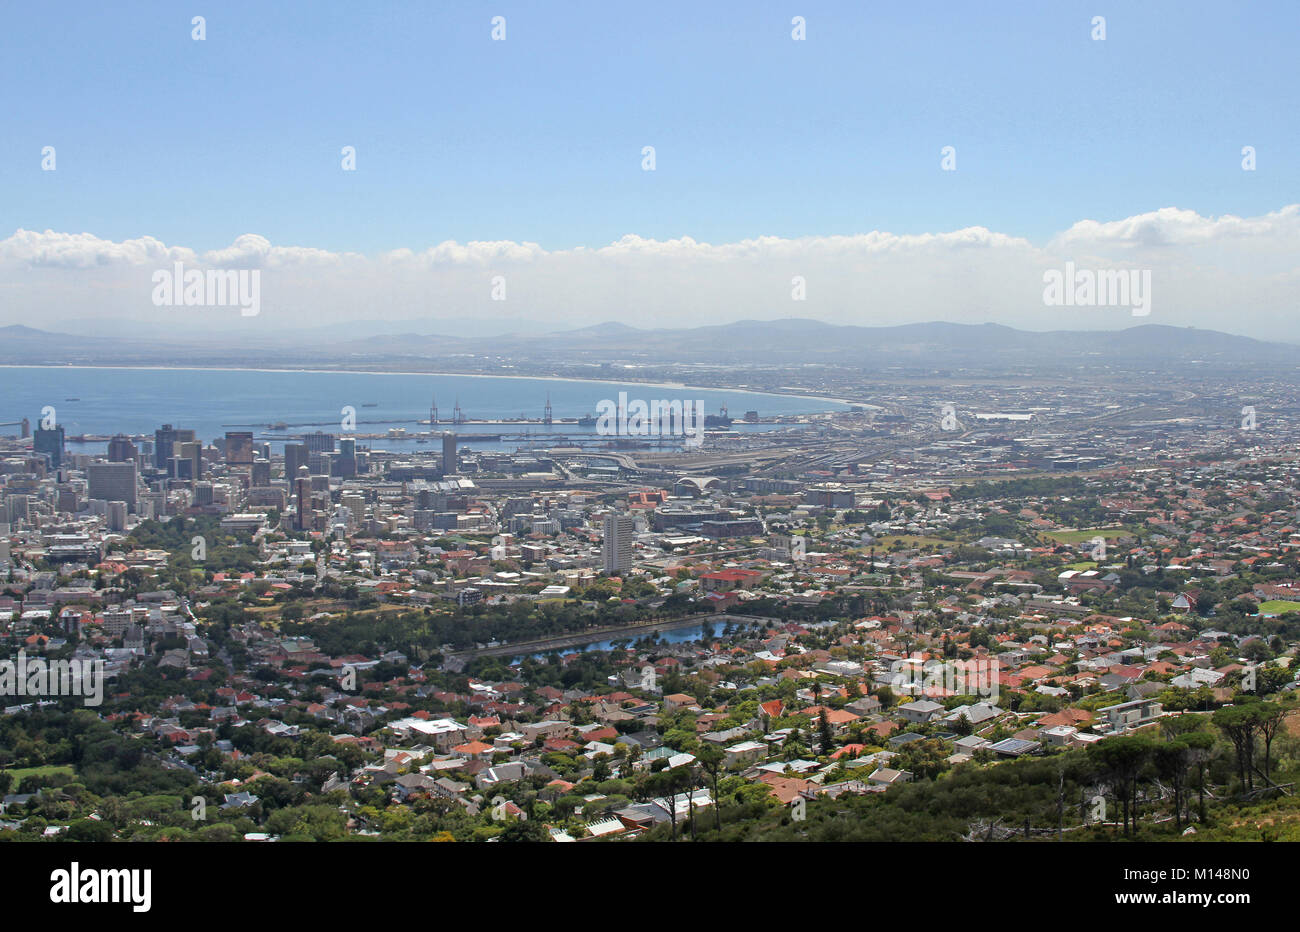 View of Cape Town from Table Mountain, Western Cape, South Africa. Stock Photo